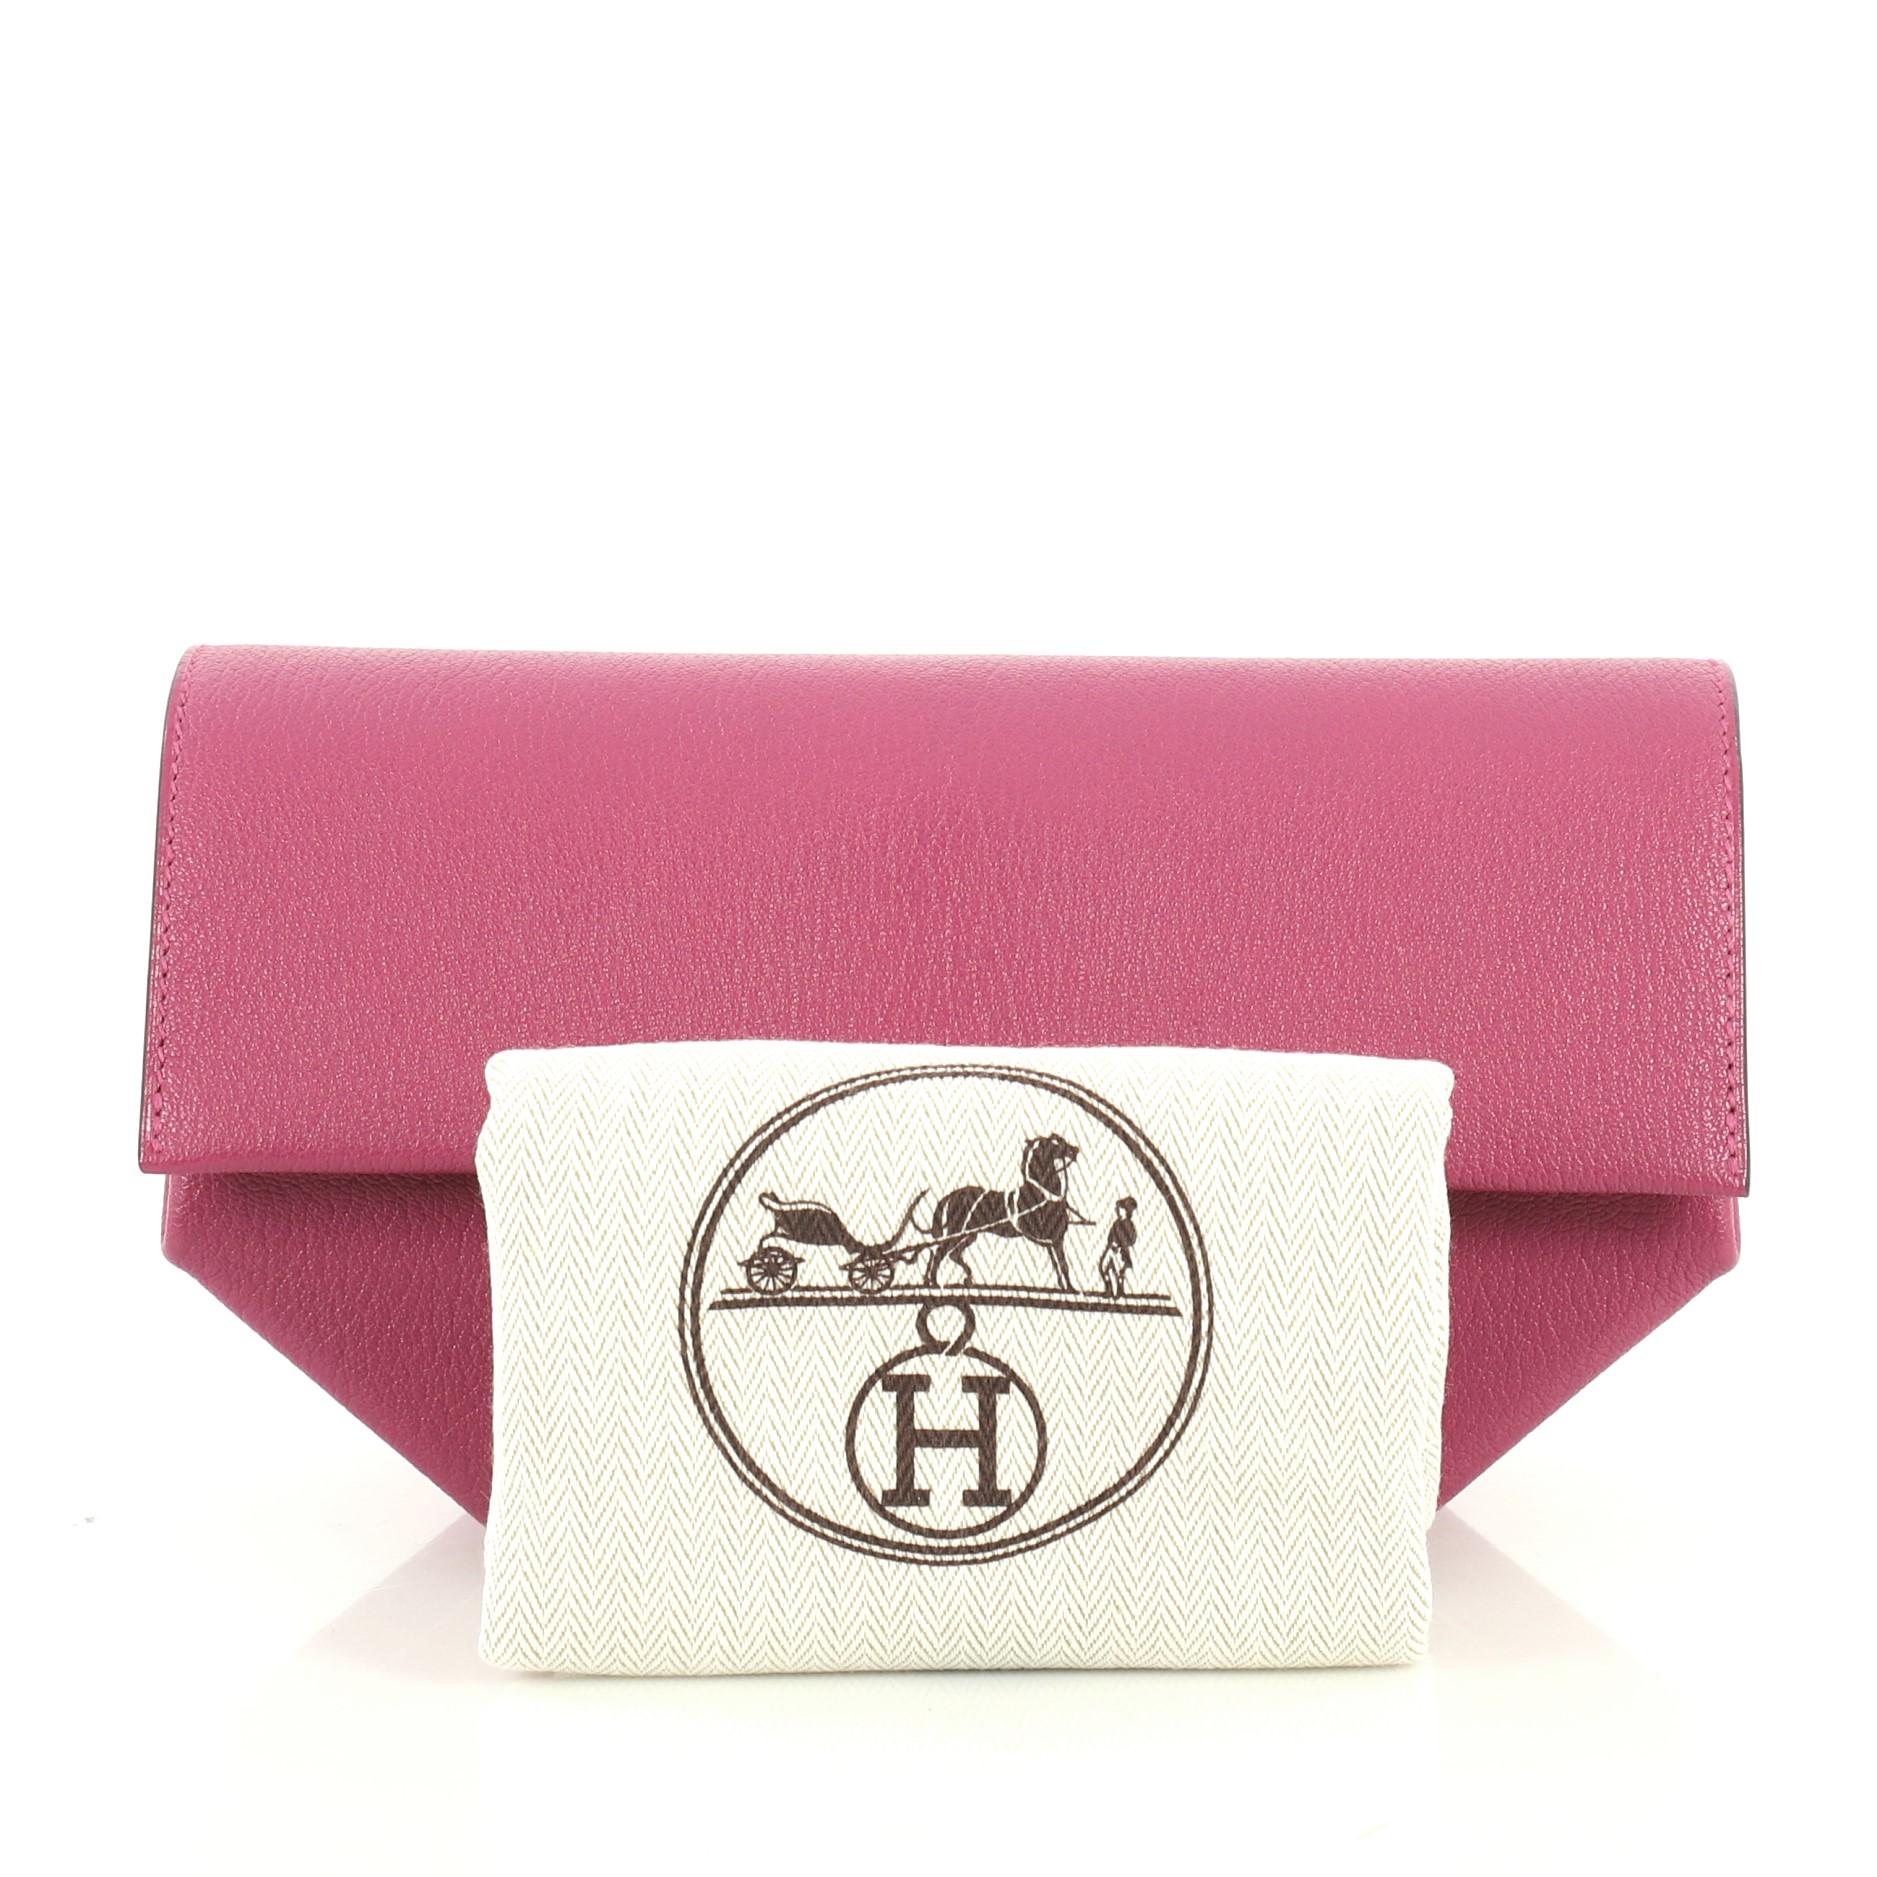 This Hermes Opli Clutch Leather, crafted from Rose Pourpre purple Chevre Mysore leather, features frontal flap and palladium hardware. Its magnetic snap closure opens to a Rose Pourpre purple Chevre leather interior with three compartments. Date